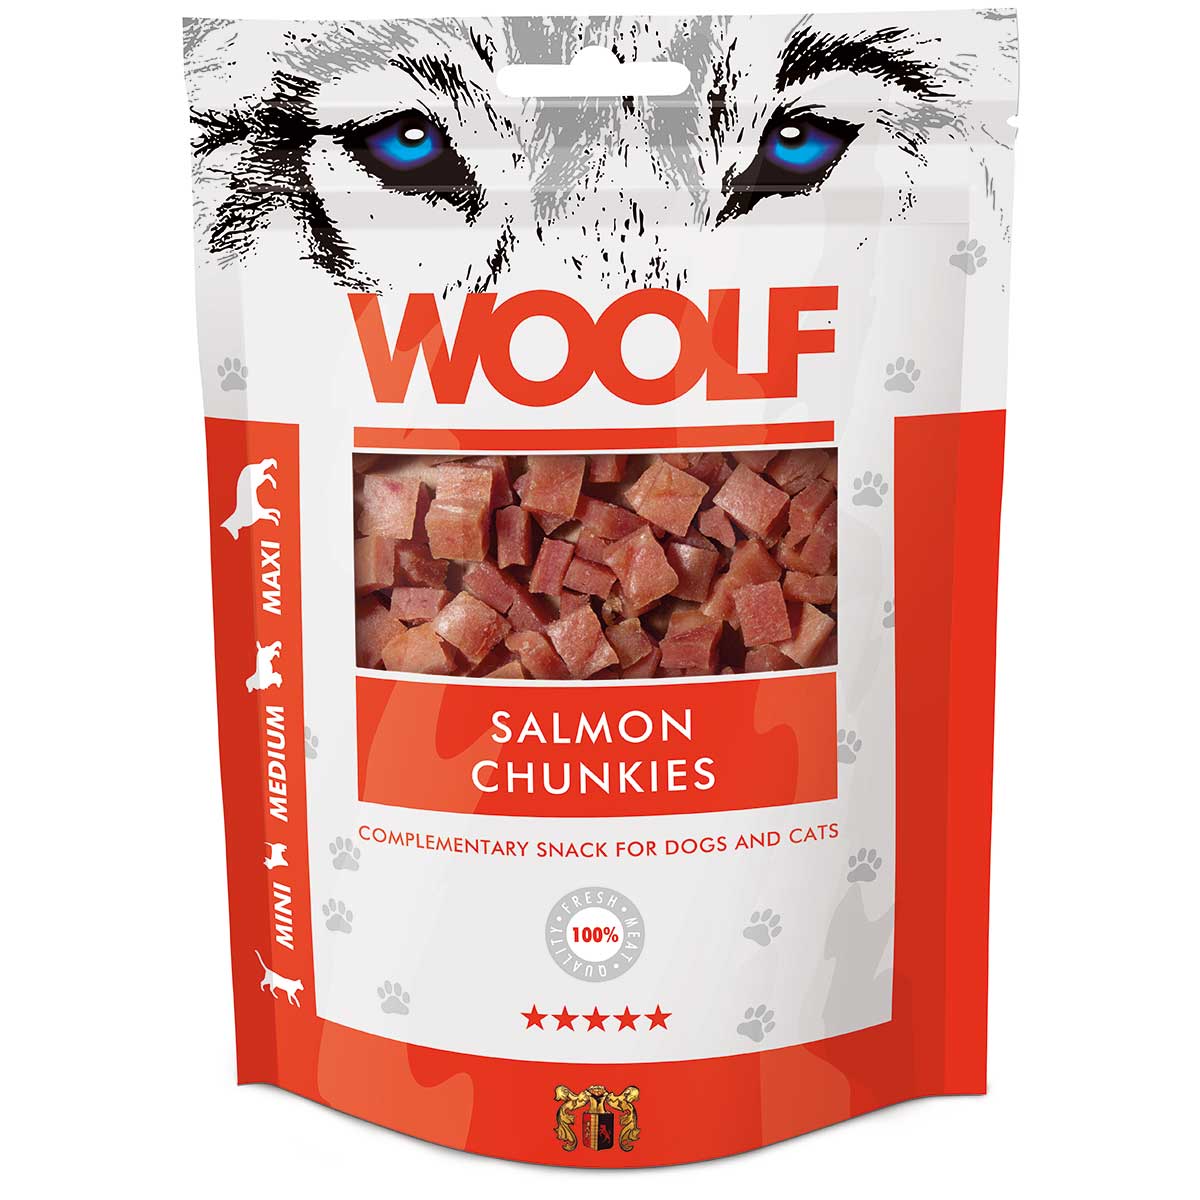 Woolf friandise pour chiens saumon Chunkies